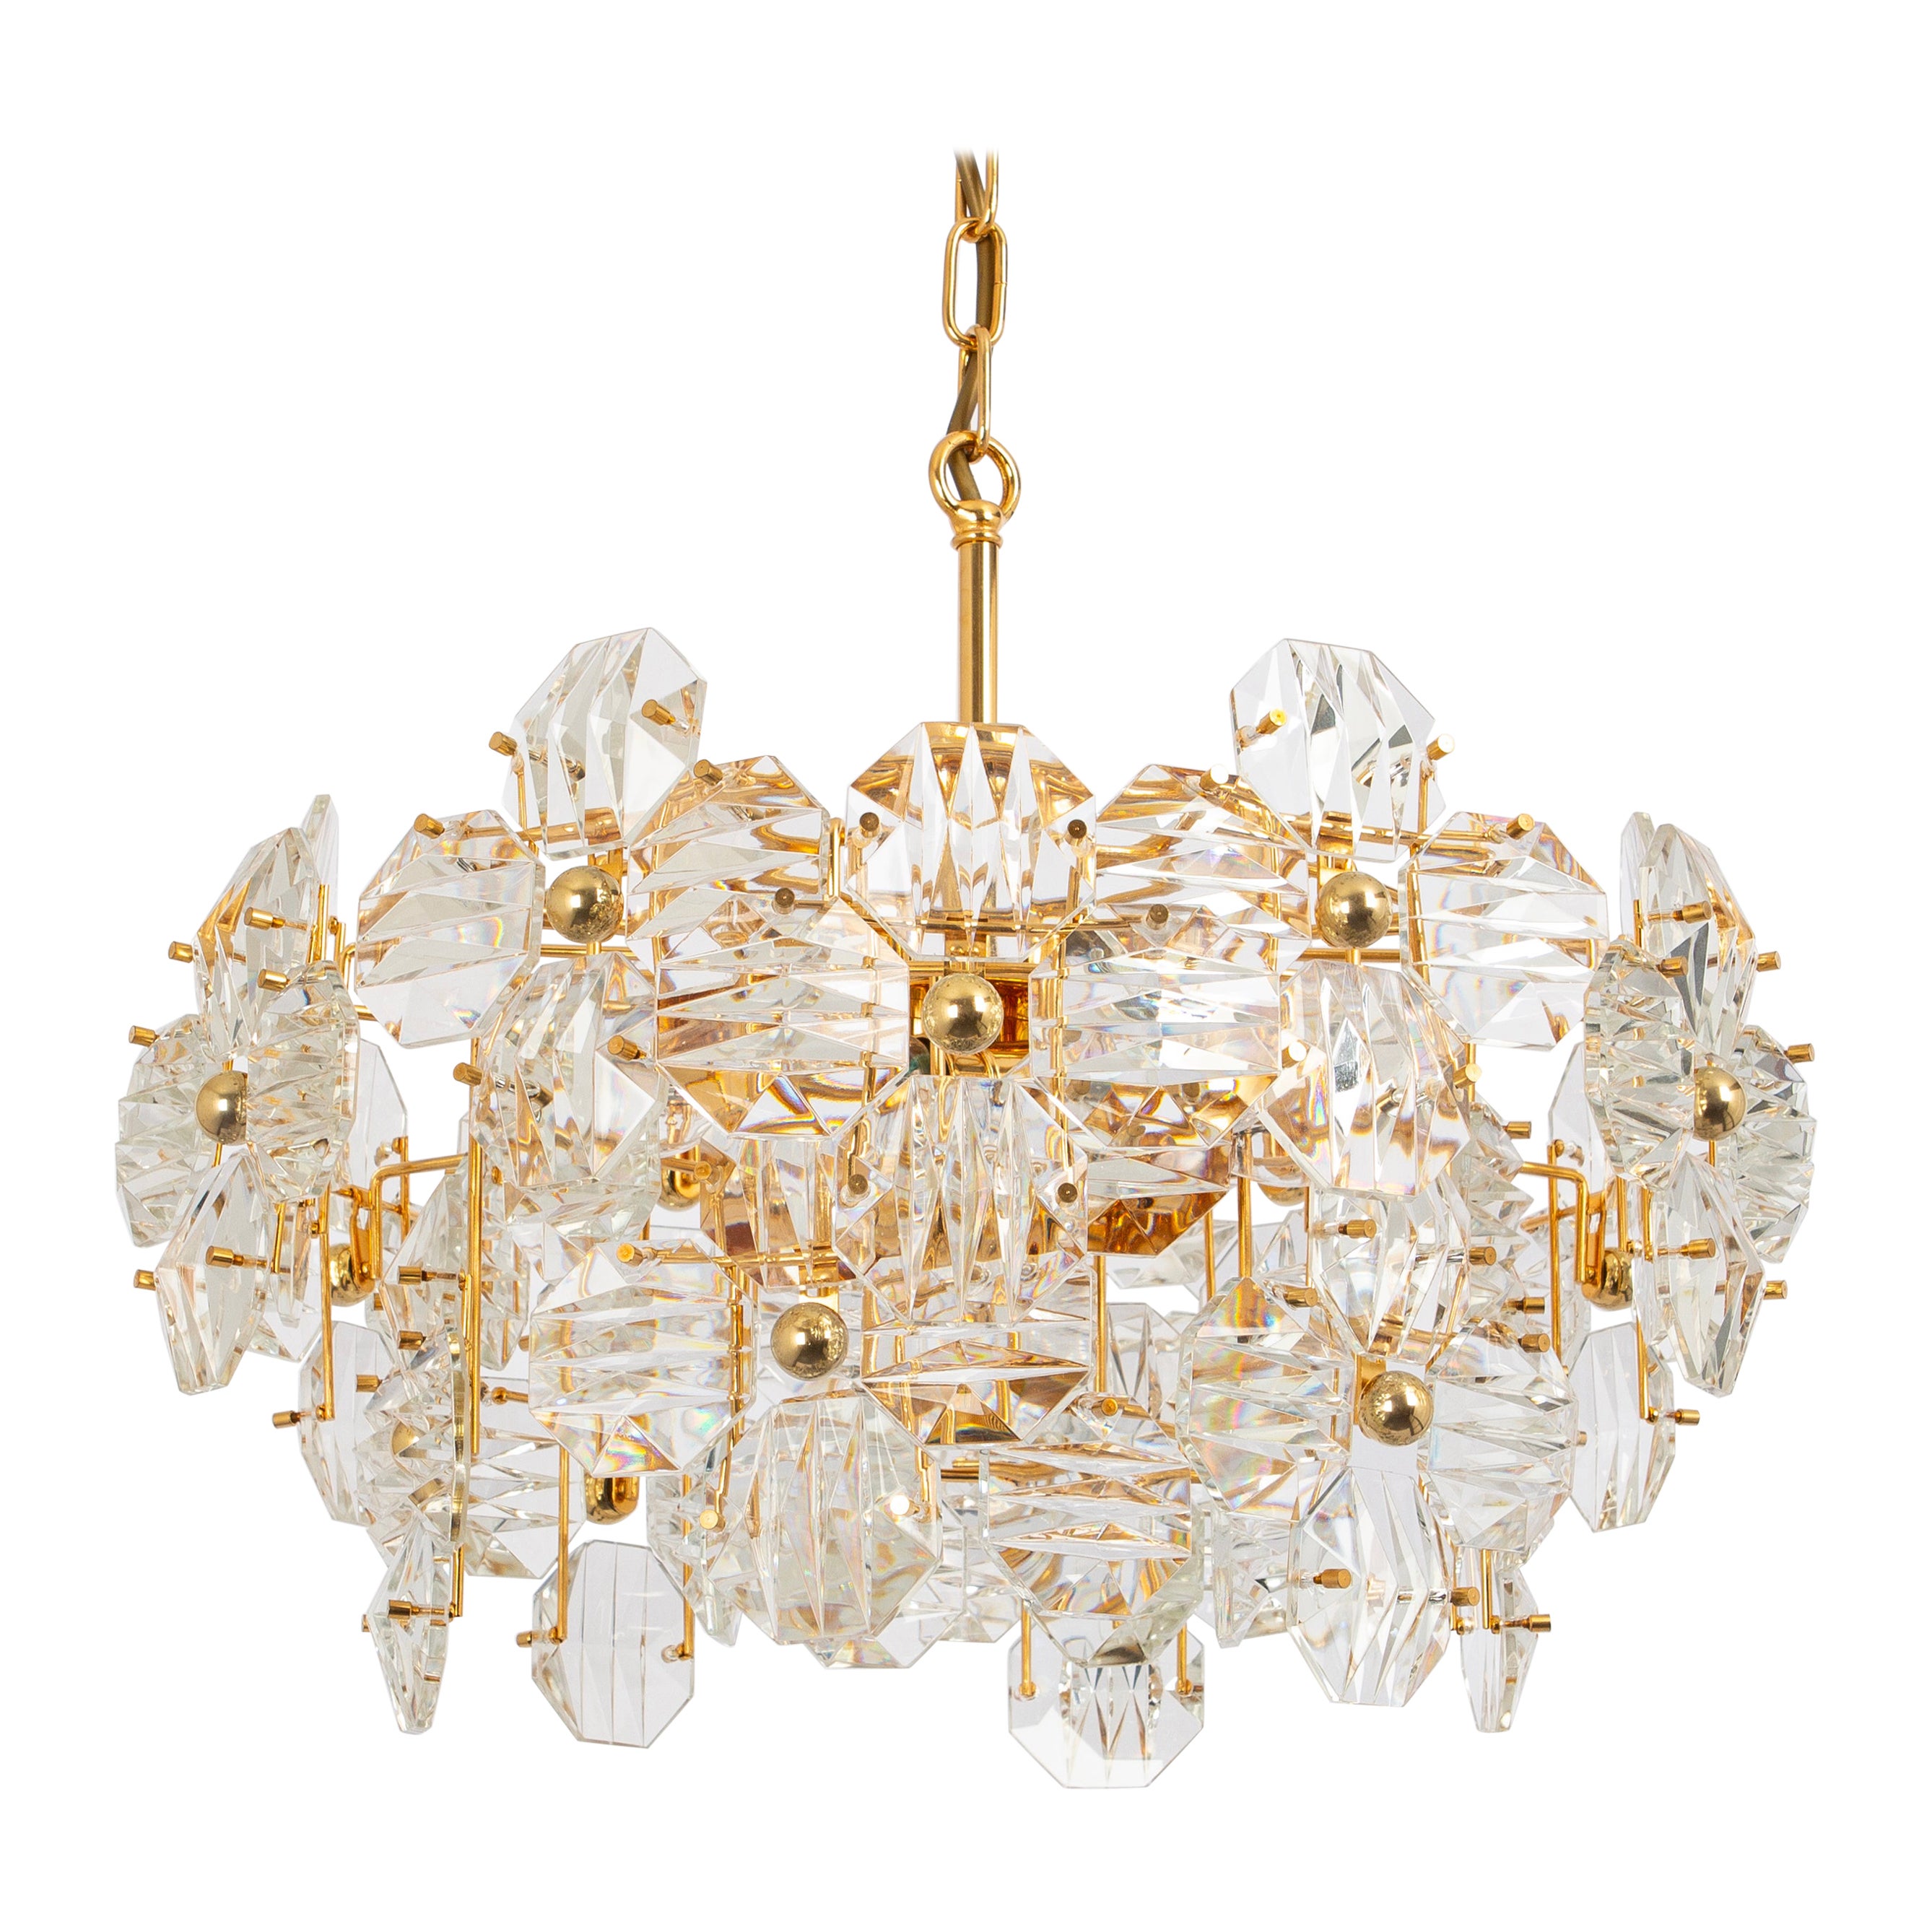 A stunning chandelier by Kinkeldey, Germany, manufactured in circa 1970-1979. A handmade and high-quality piece. The fixture is made of brass with lots of facetted crystal glass elements.

Sockets: 6 x E14 candelabra and one x E27 standard